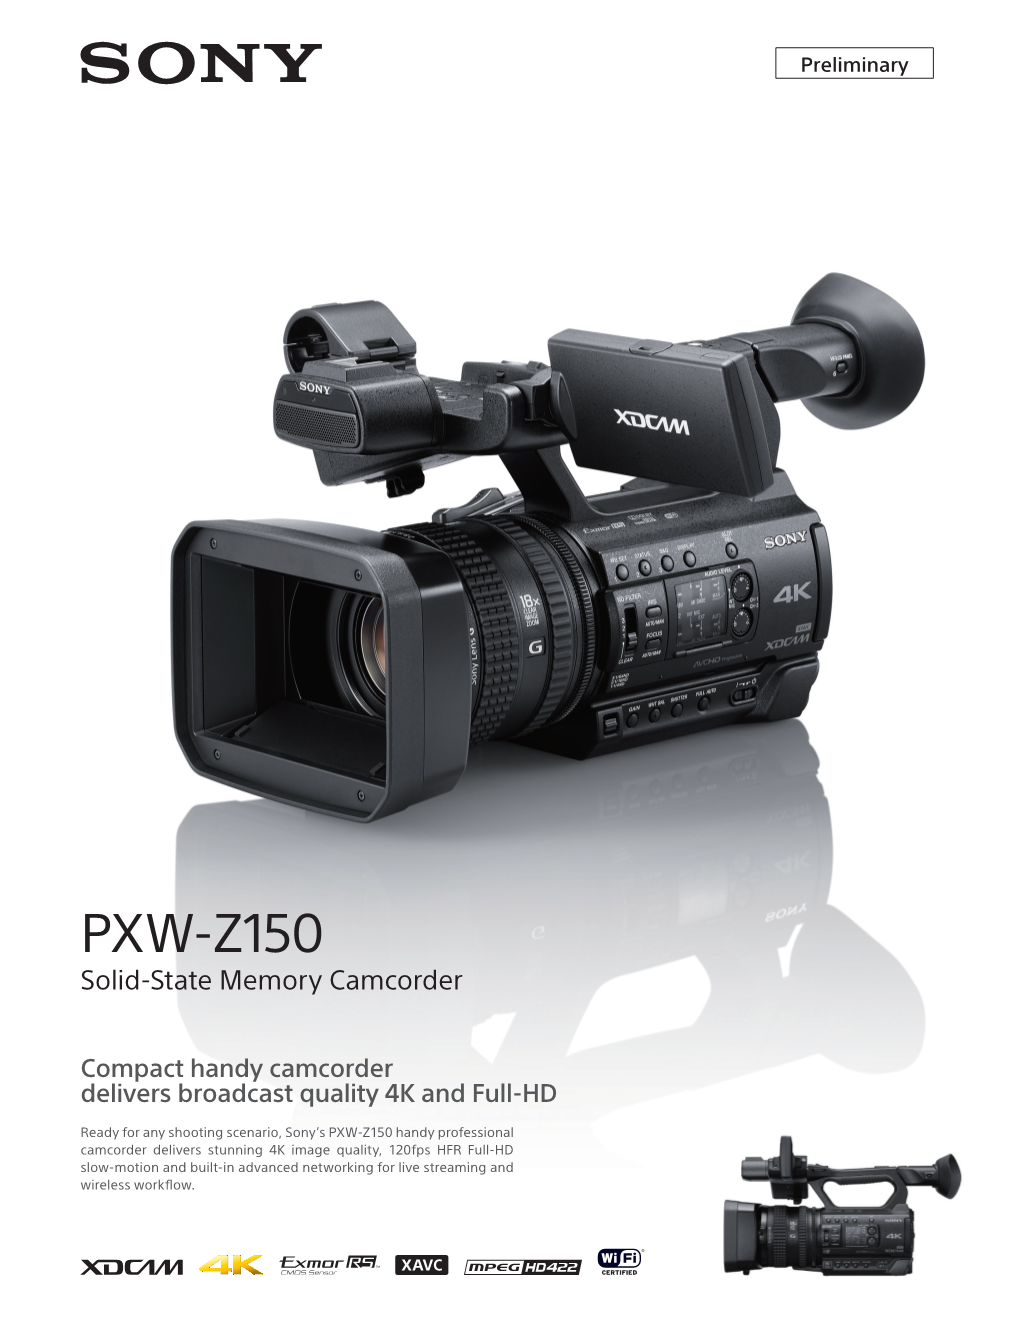 PXW-Z150 Solid-State Memory Camcorder